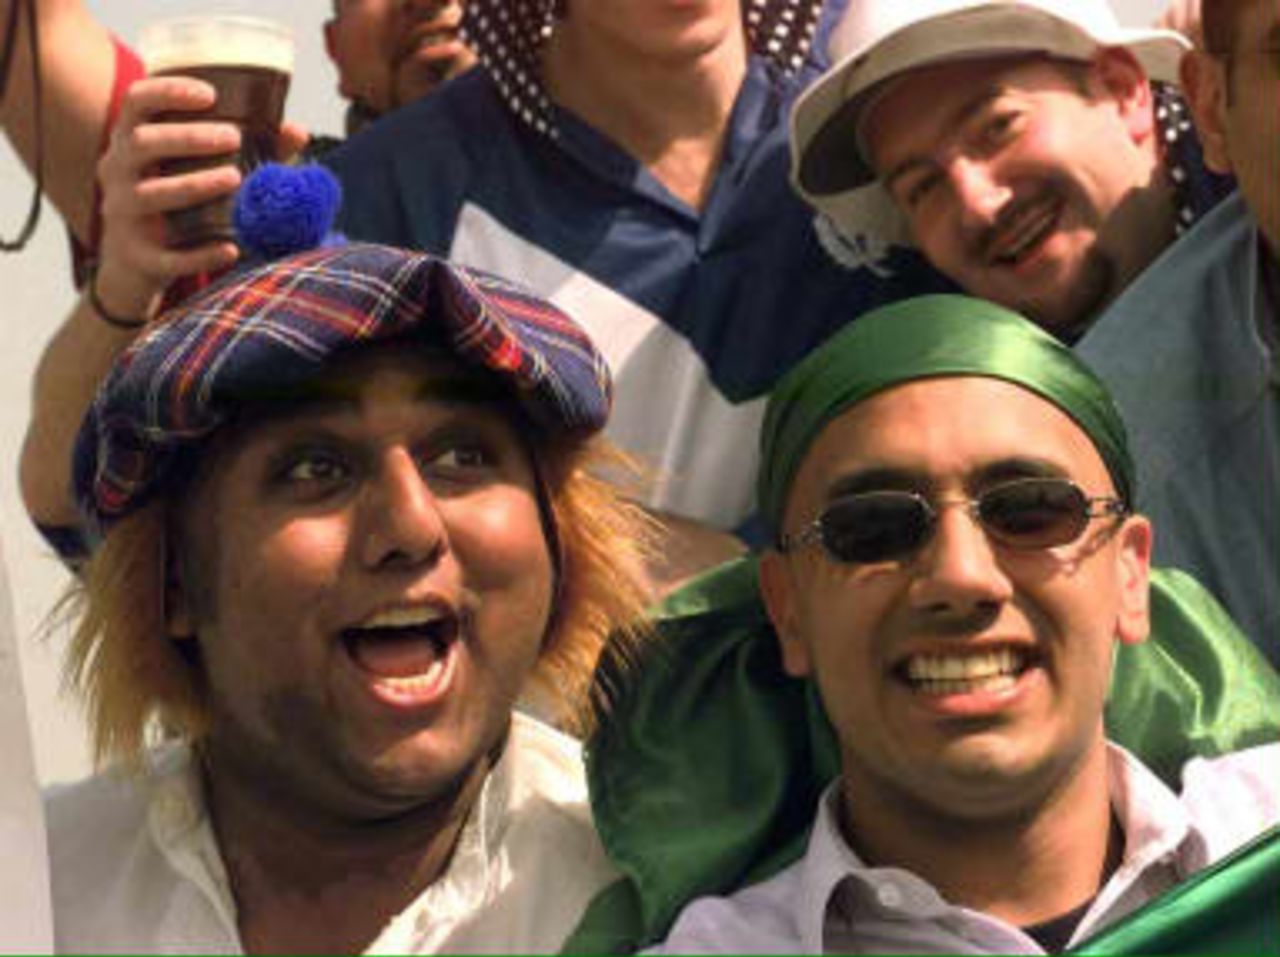 Pakistan cricket supporters enter into the spirit of the 'Carnival of Cricket' as one wears a Scottish hat and wig while the other wears more traditional Pakistani colours during their Cricket World Cup Match against Scotland at Chester-le-Street 20 May, 1999.